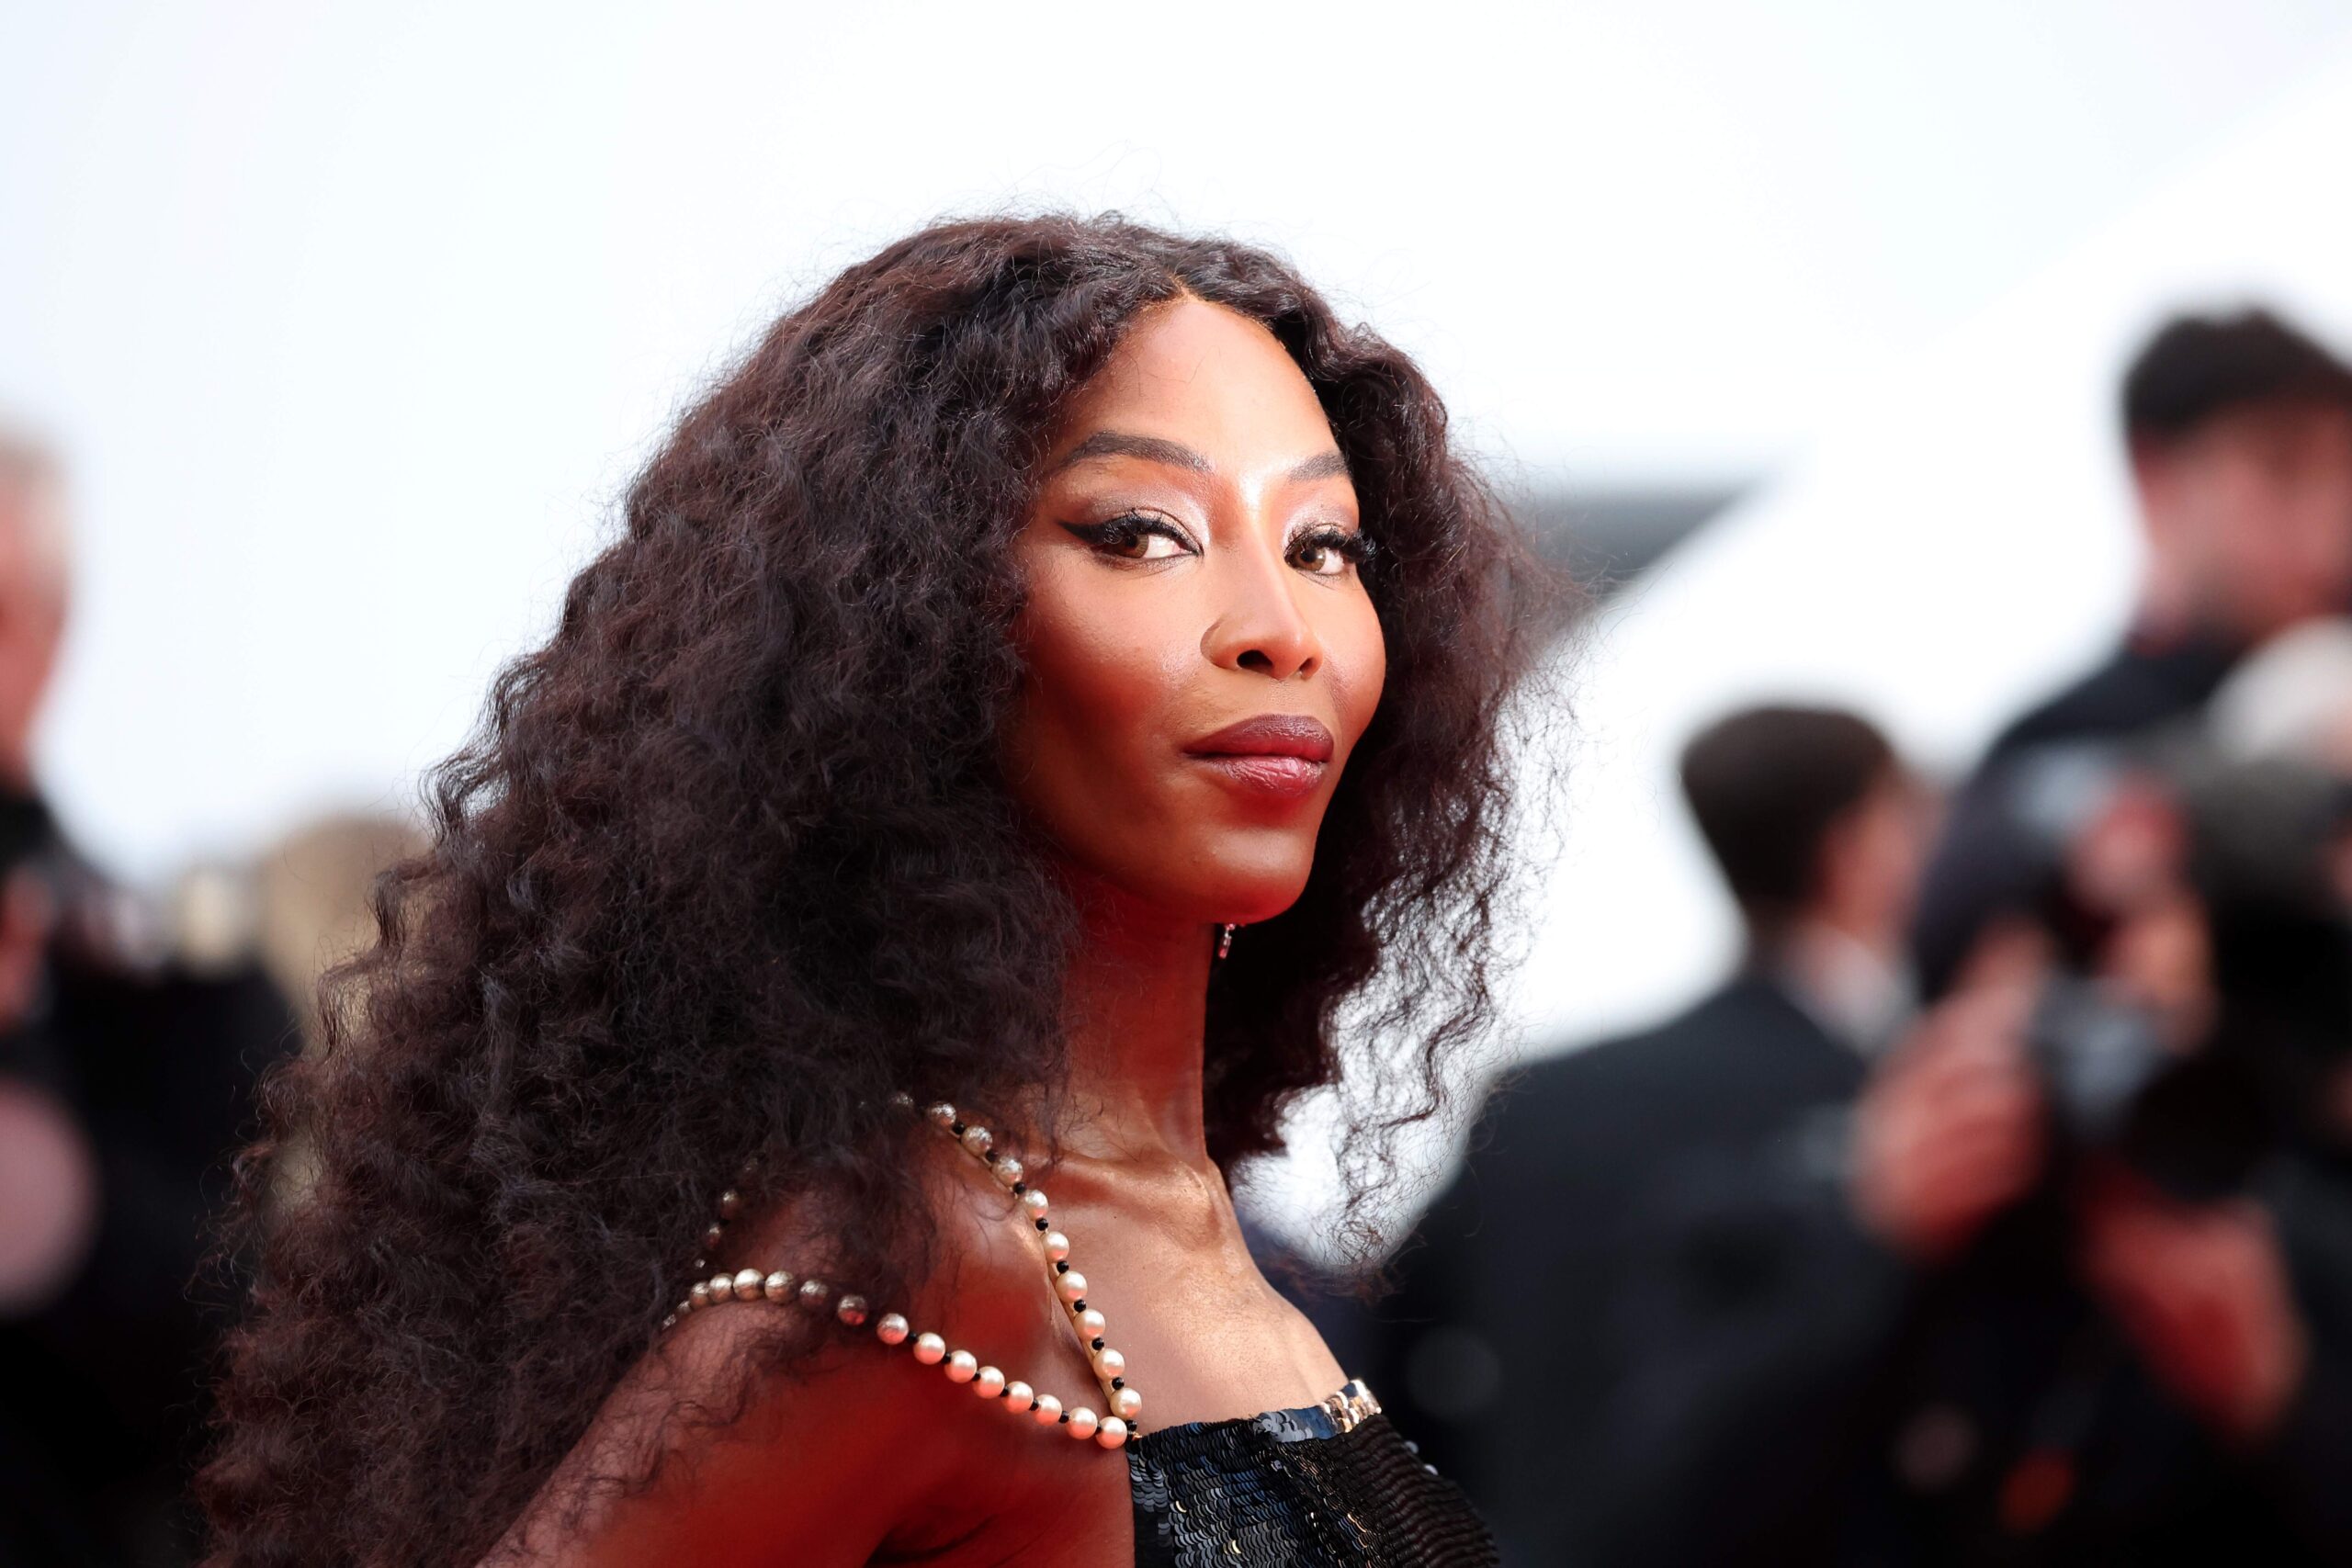 A closeup of Naomi Campbell's face on the red carpet in Cannes